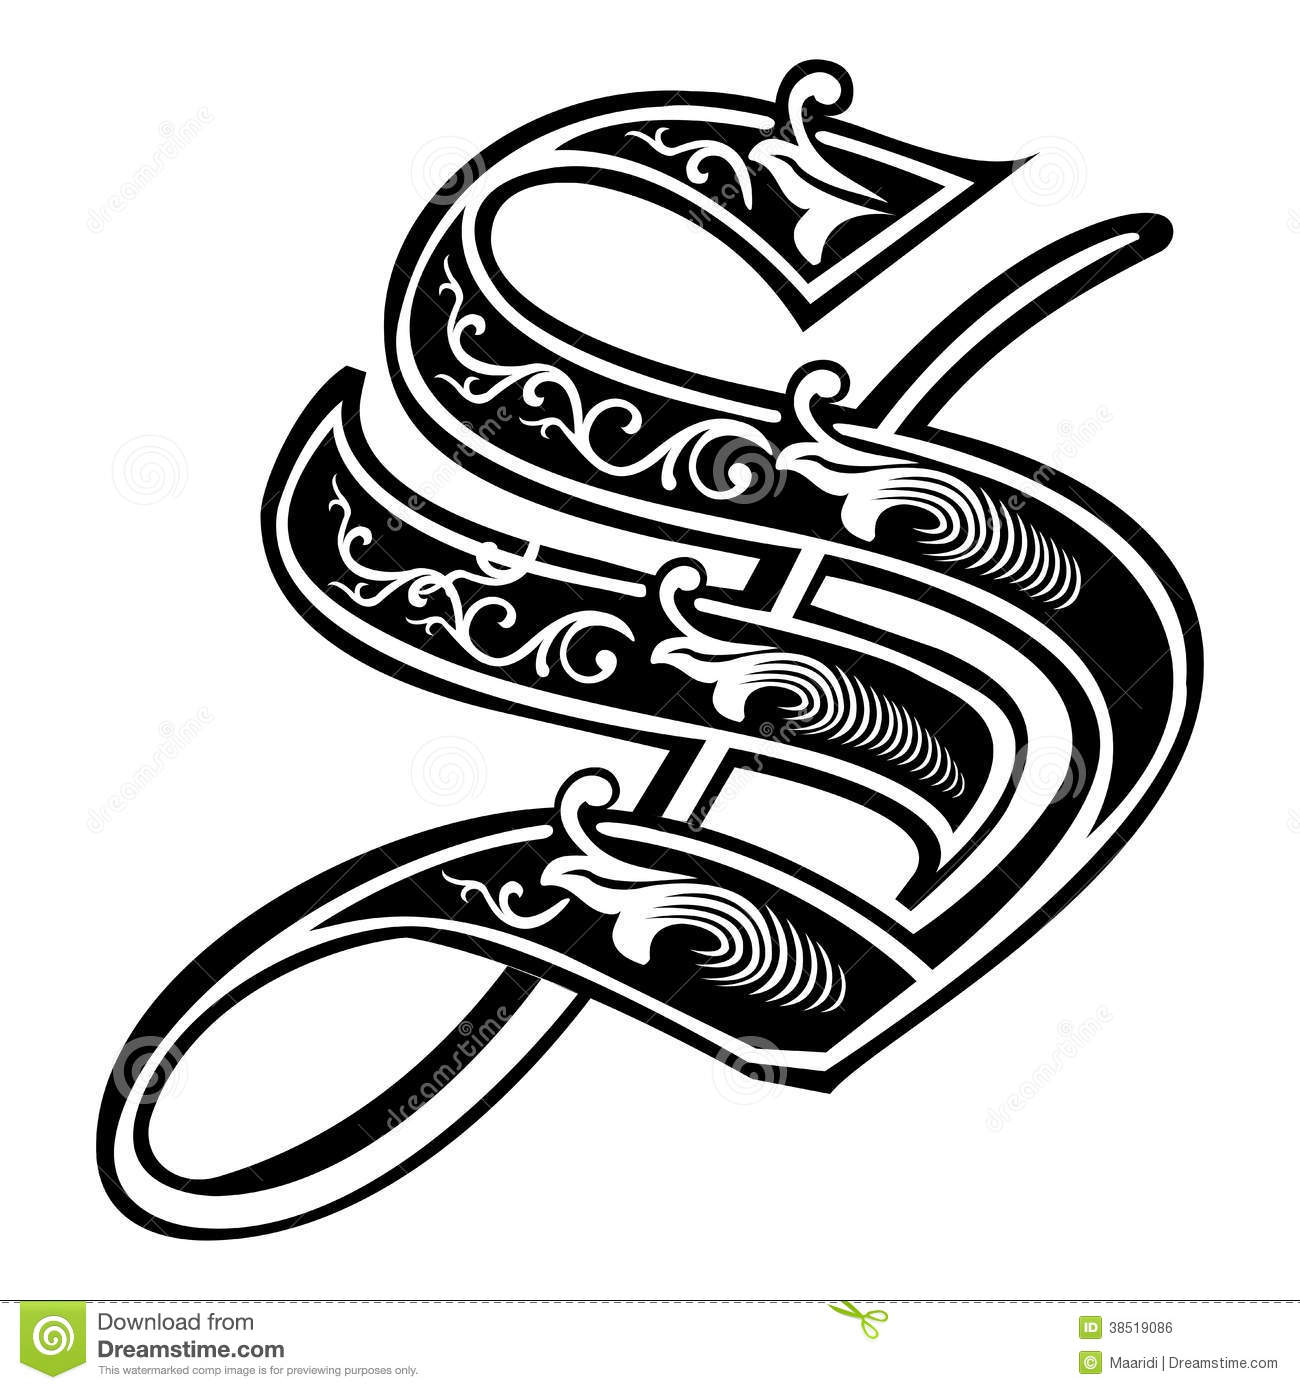 Fancy Letter S Tattoo Designs Images